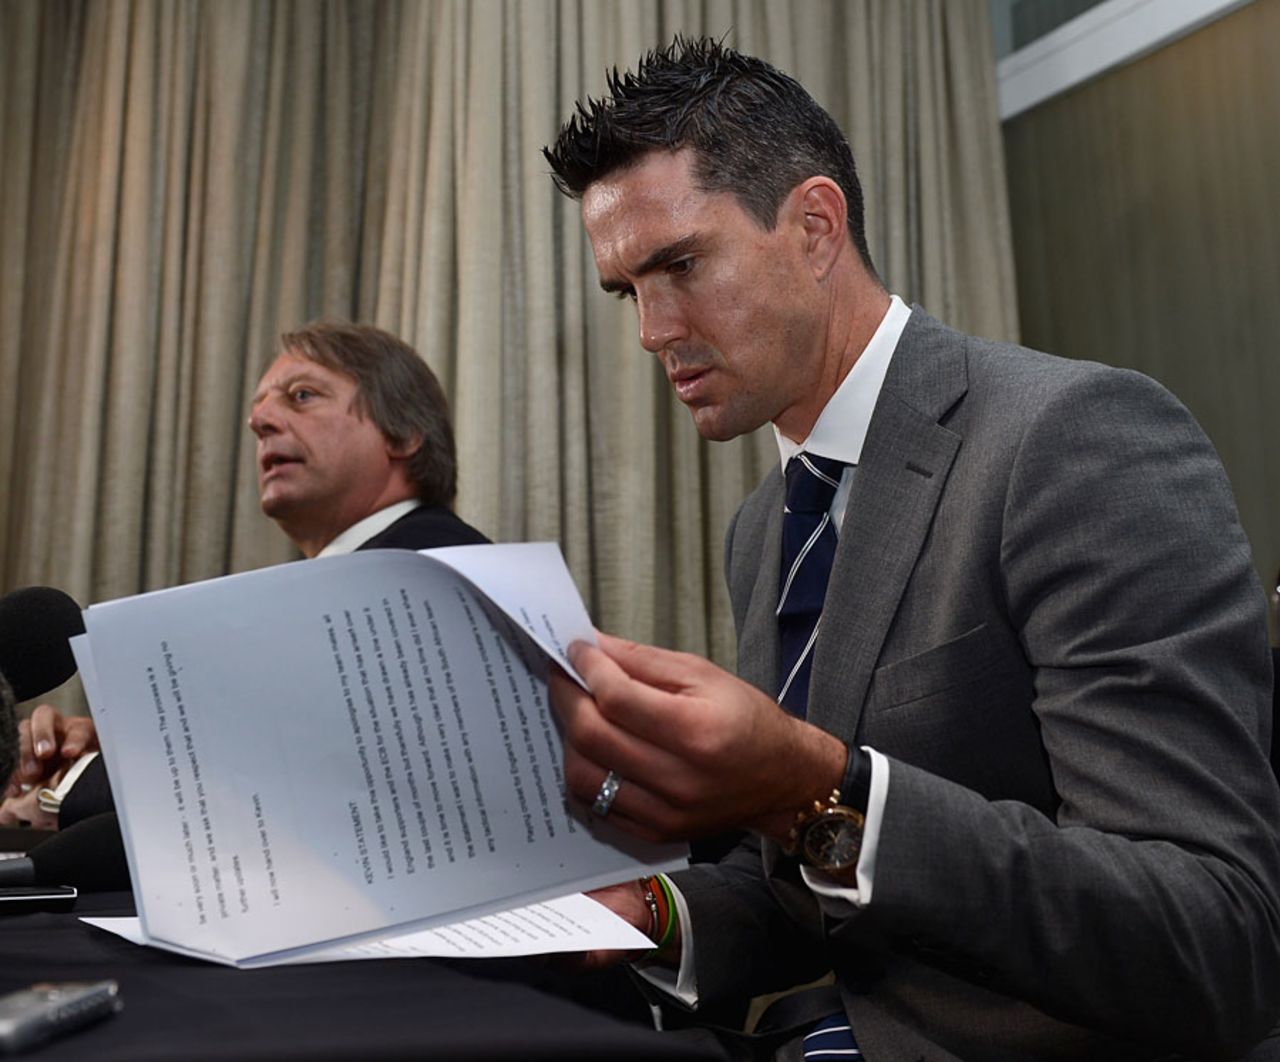 Kevin Pietersen checks his notes, Colombo, October 3, 2012